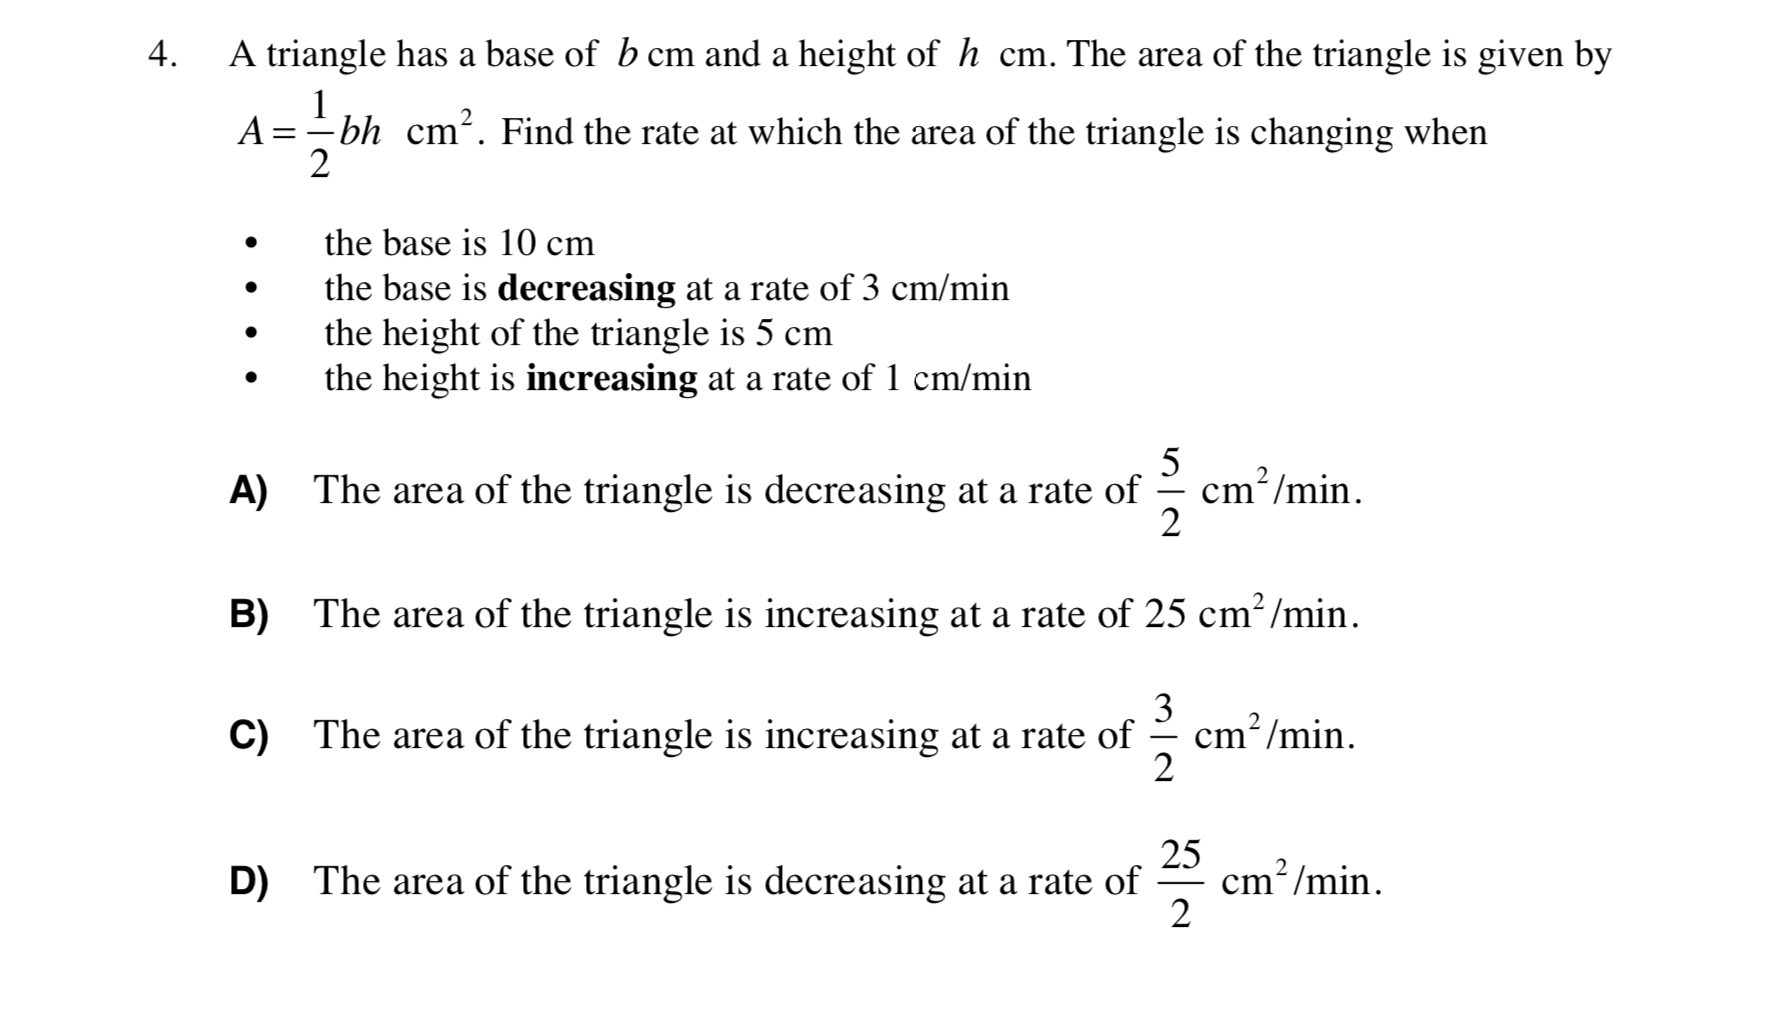 A triangle has a base of b cm and a height of h cm. The area of the triangle is given by
4.
A =- bh cm². Find the rate at which the area of the triangle is changing when
the base is 10 cm
the base is decreasing at a rate of 3 cm/min
the height of the triangle is 5 cm
the height is increasing at a rate of 1 cm/min
5
cm?/min.
The area of the triangle is decreasing at a rate of
A)
The area of the triangle is increasing at a rate of 25 cm? /min.
B)
3
cm?/min.
2
C) The area of the triangle is increasing at a rate of
25
cm? /min.
2
2
D)
The area of the triangle is decreasing at a rate of
